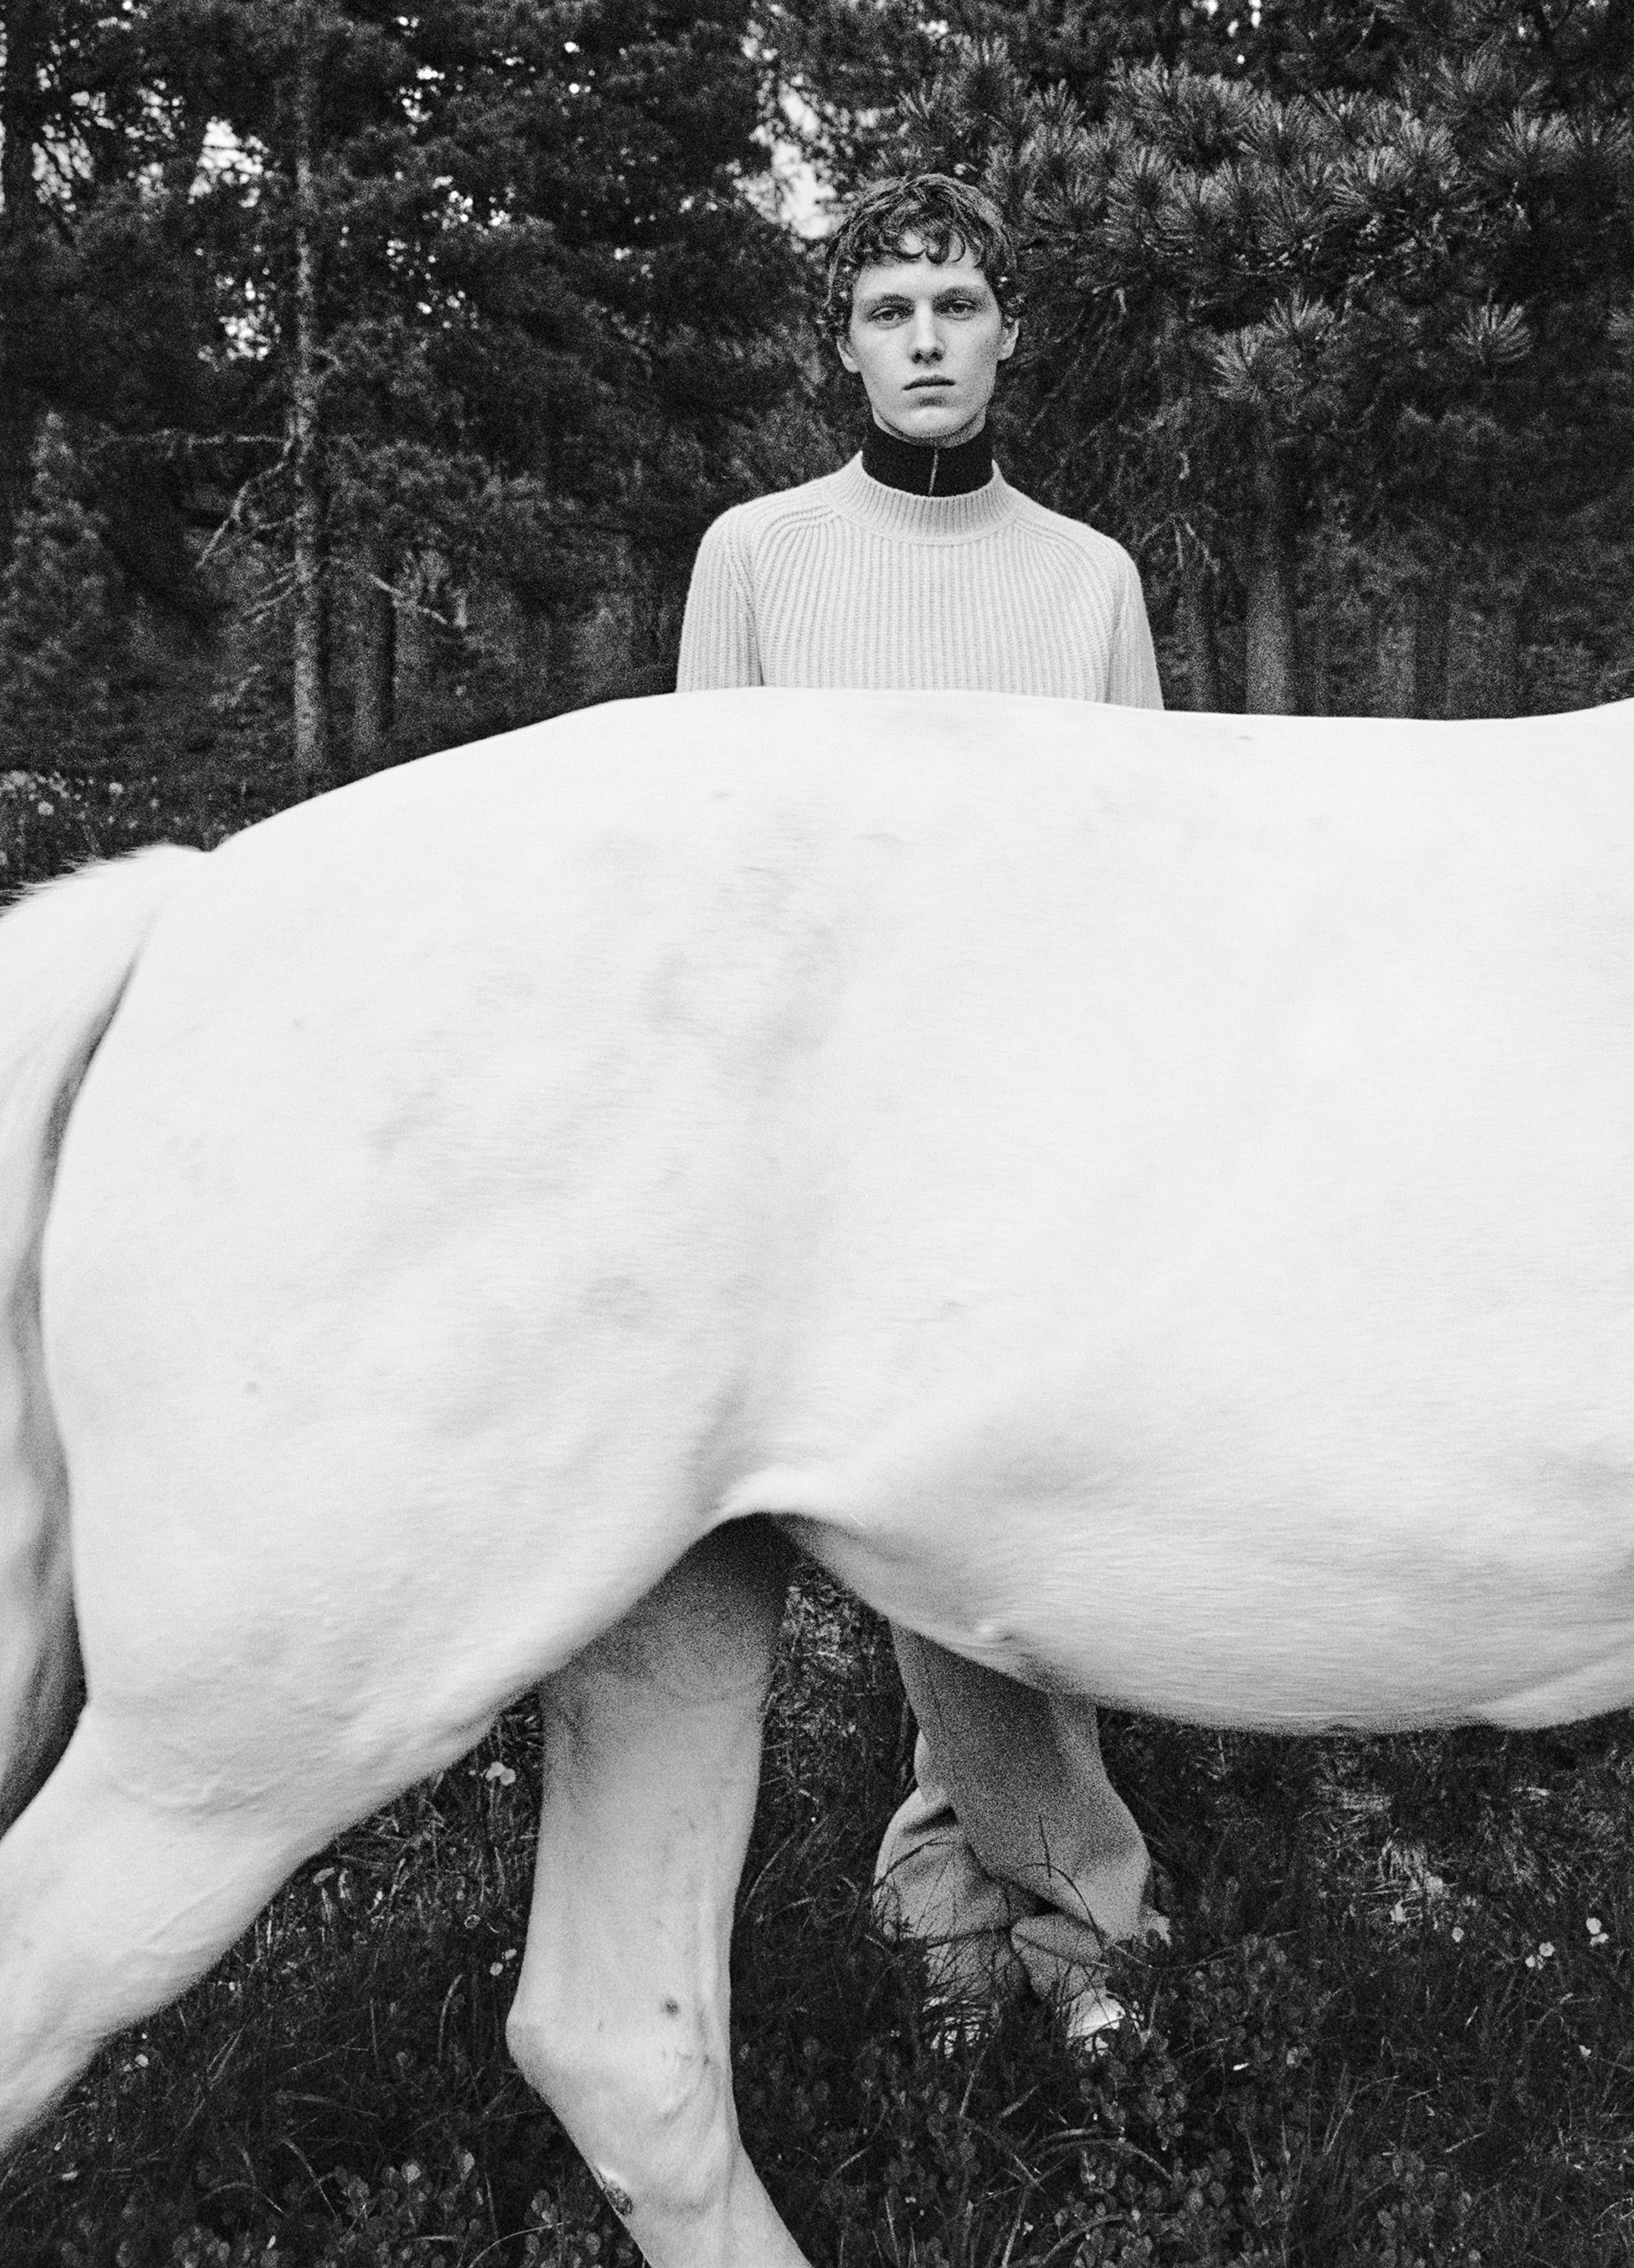 Black and white photograph Jil Sander campaign male model standing behind white horse